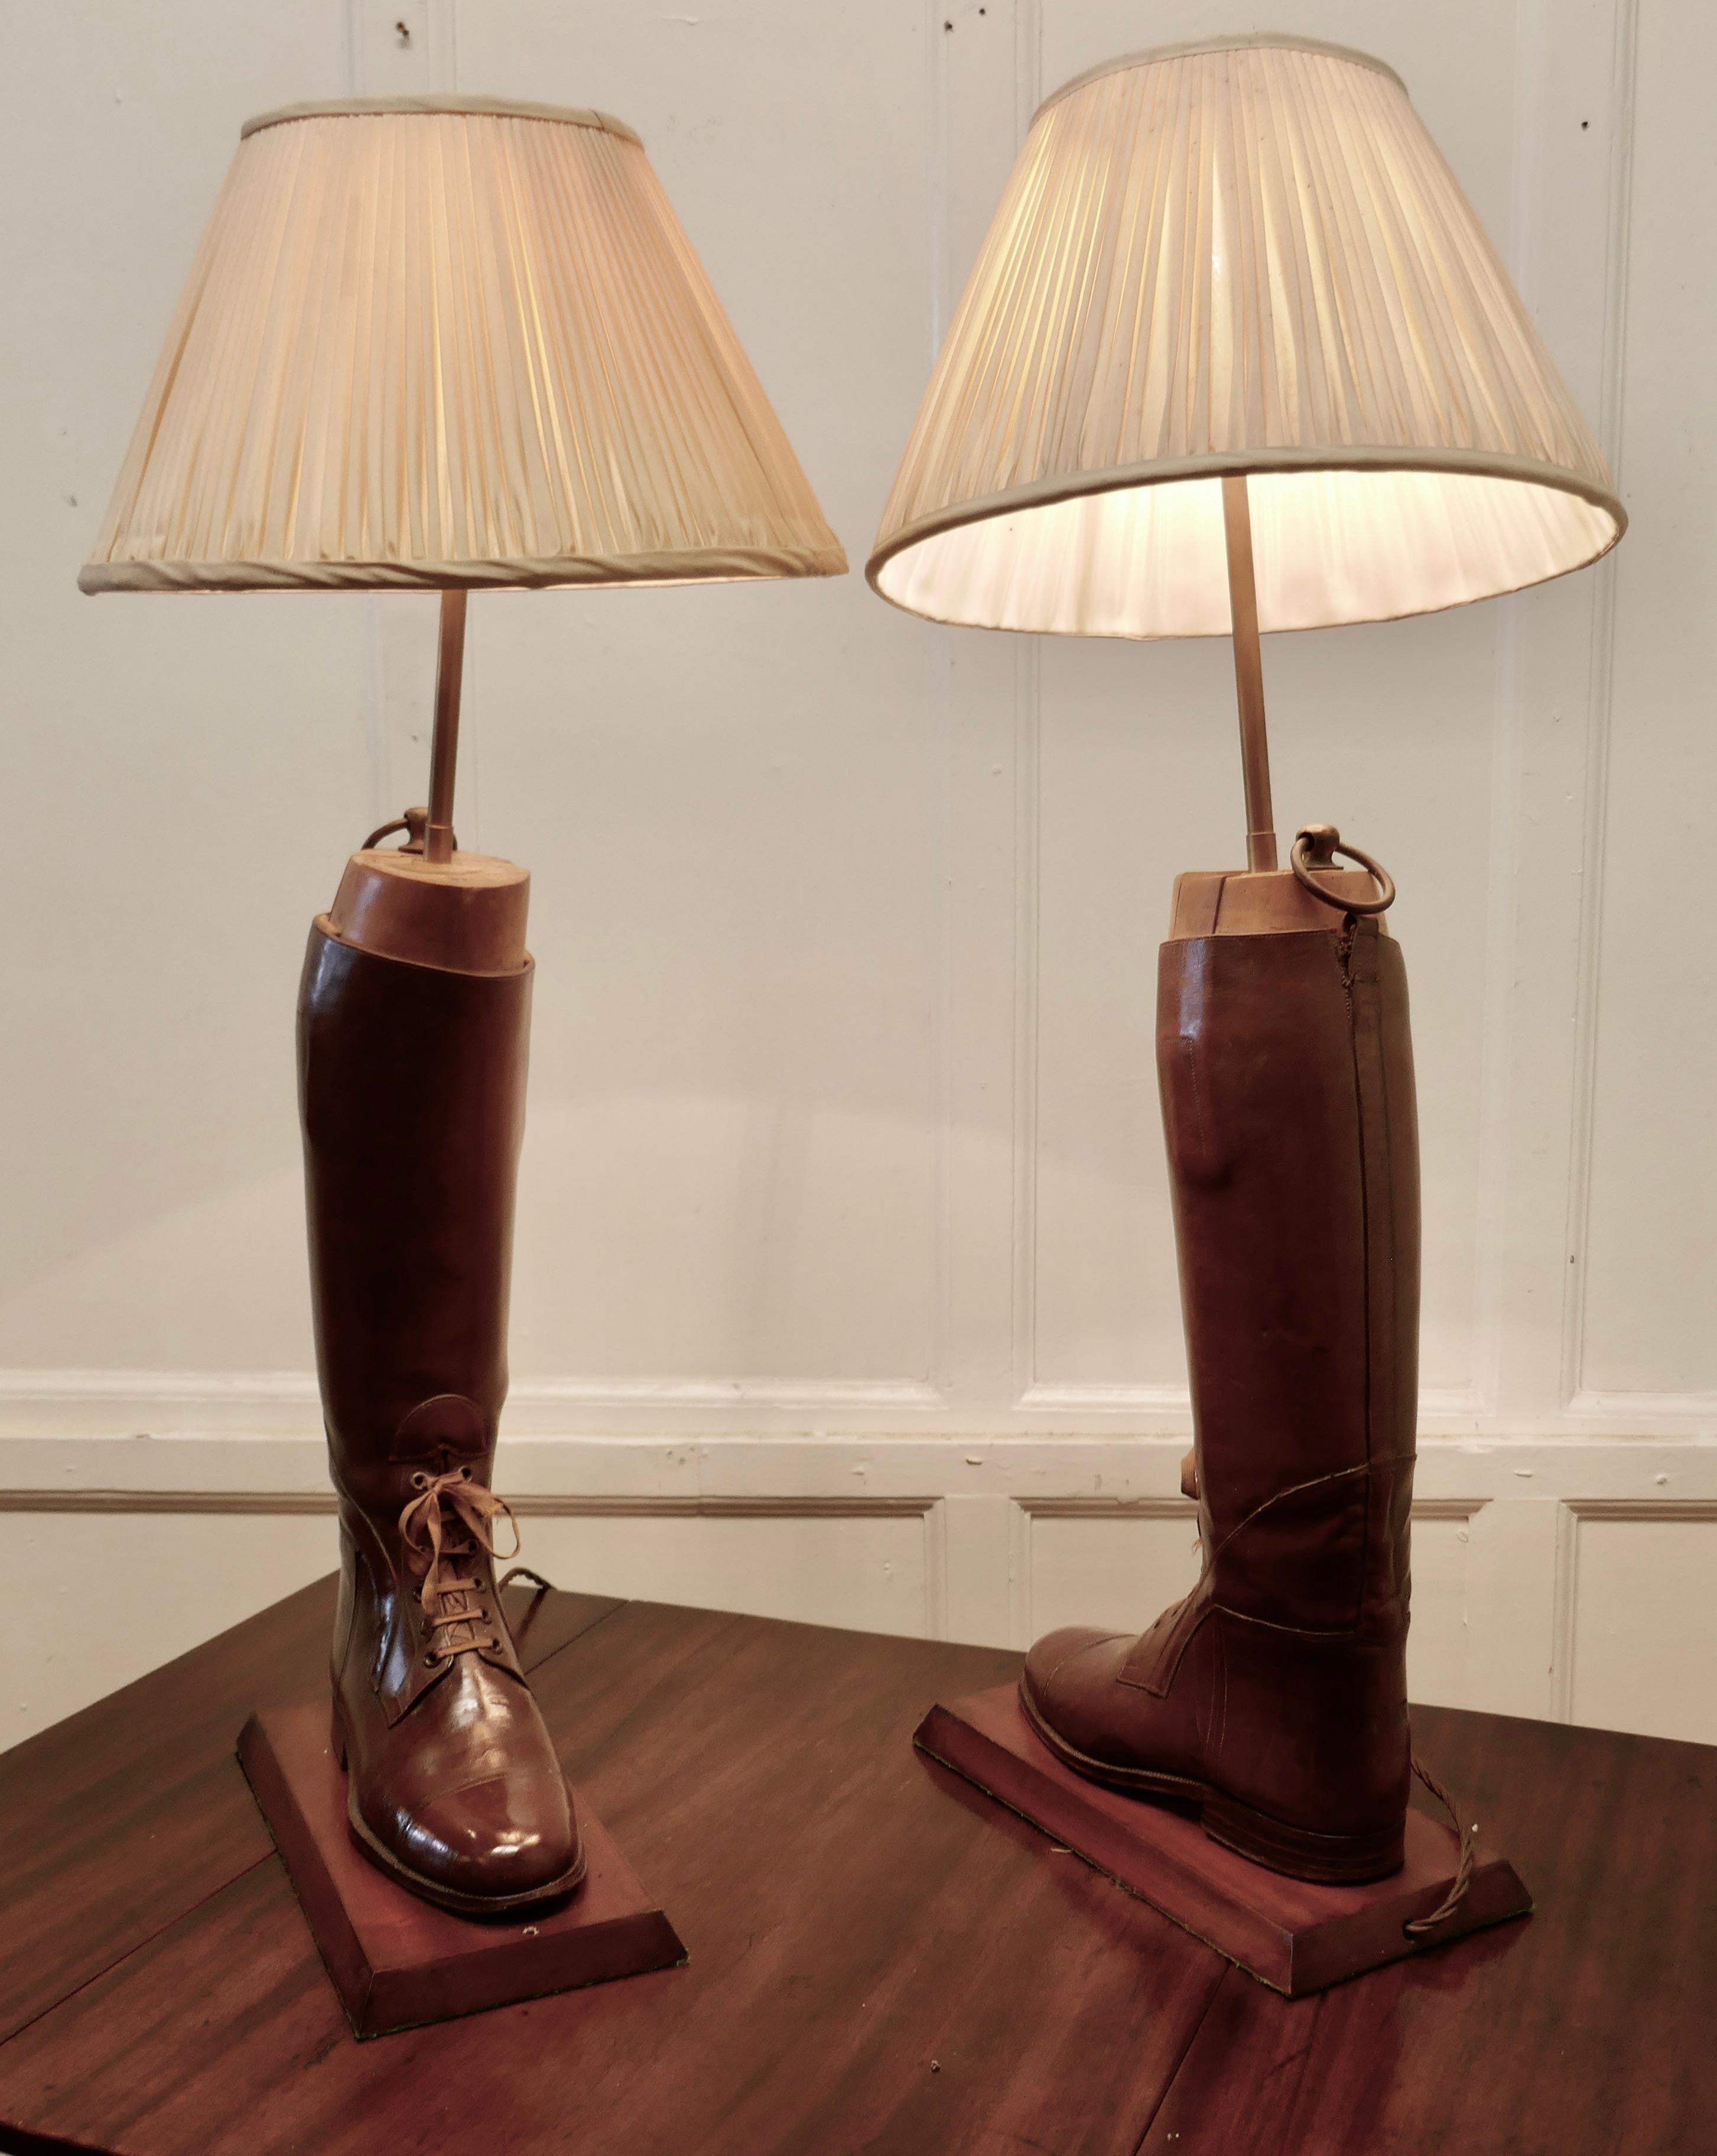 Leather Pair of Boot Lamps, Made from Early 20th Century Cavalry Officer’s Riding Boots